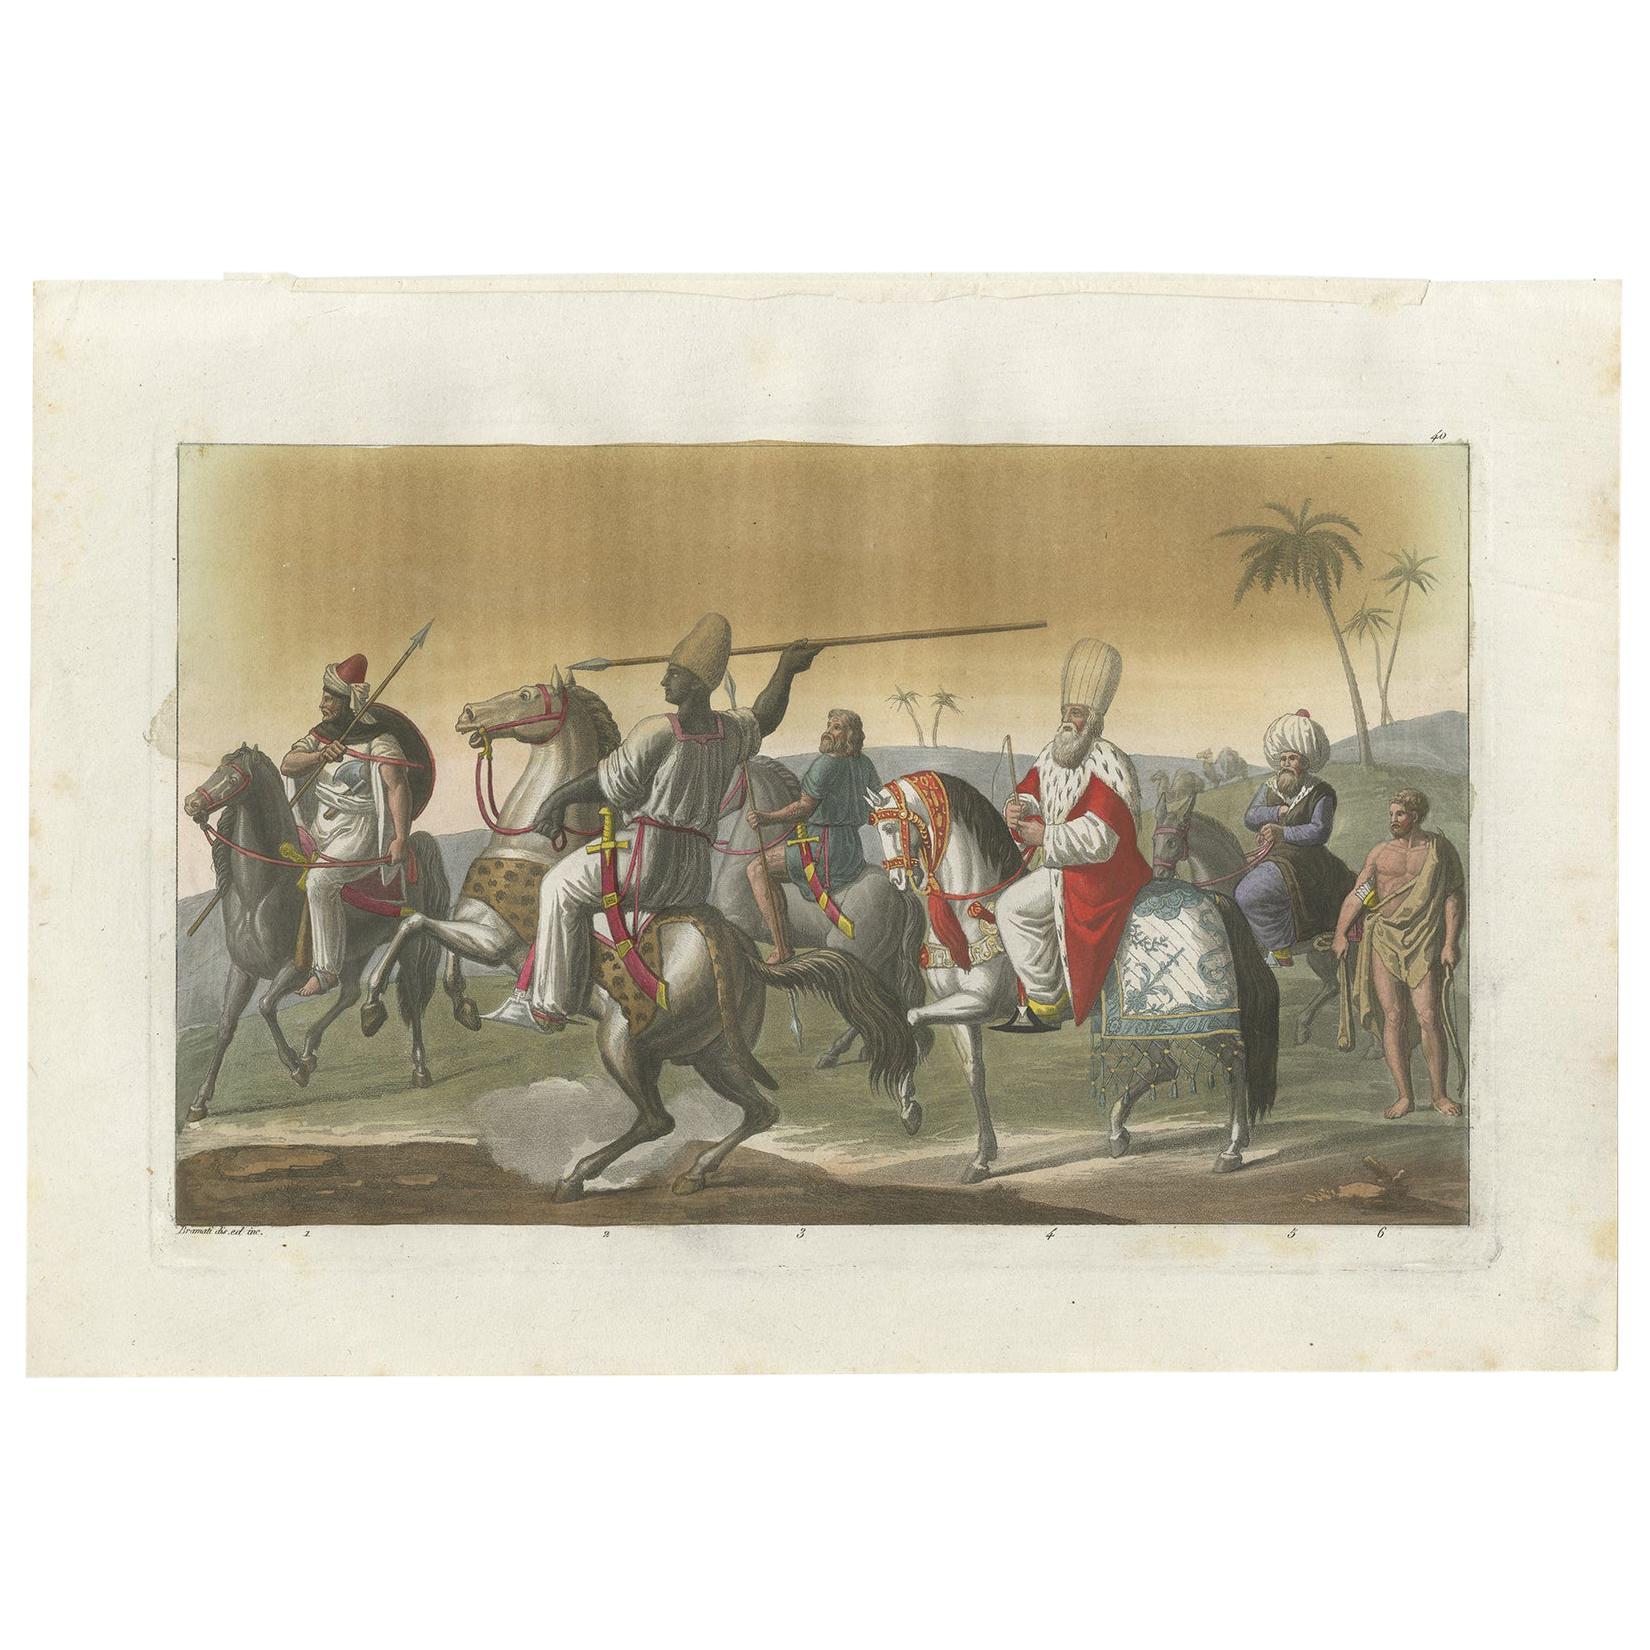 Antique Print of Arab Soldiers by Ferrario, '1831'